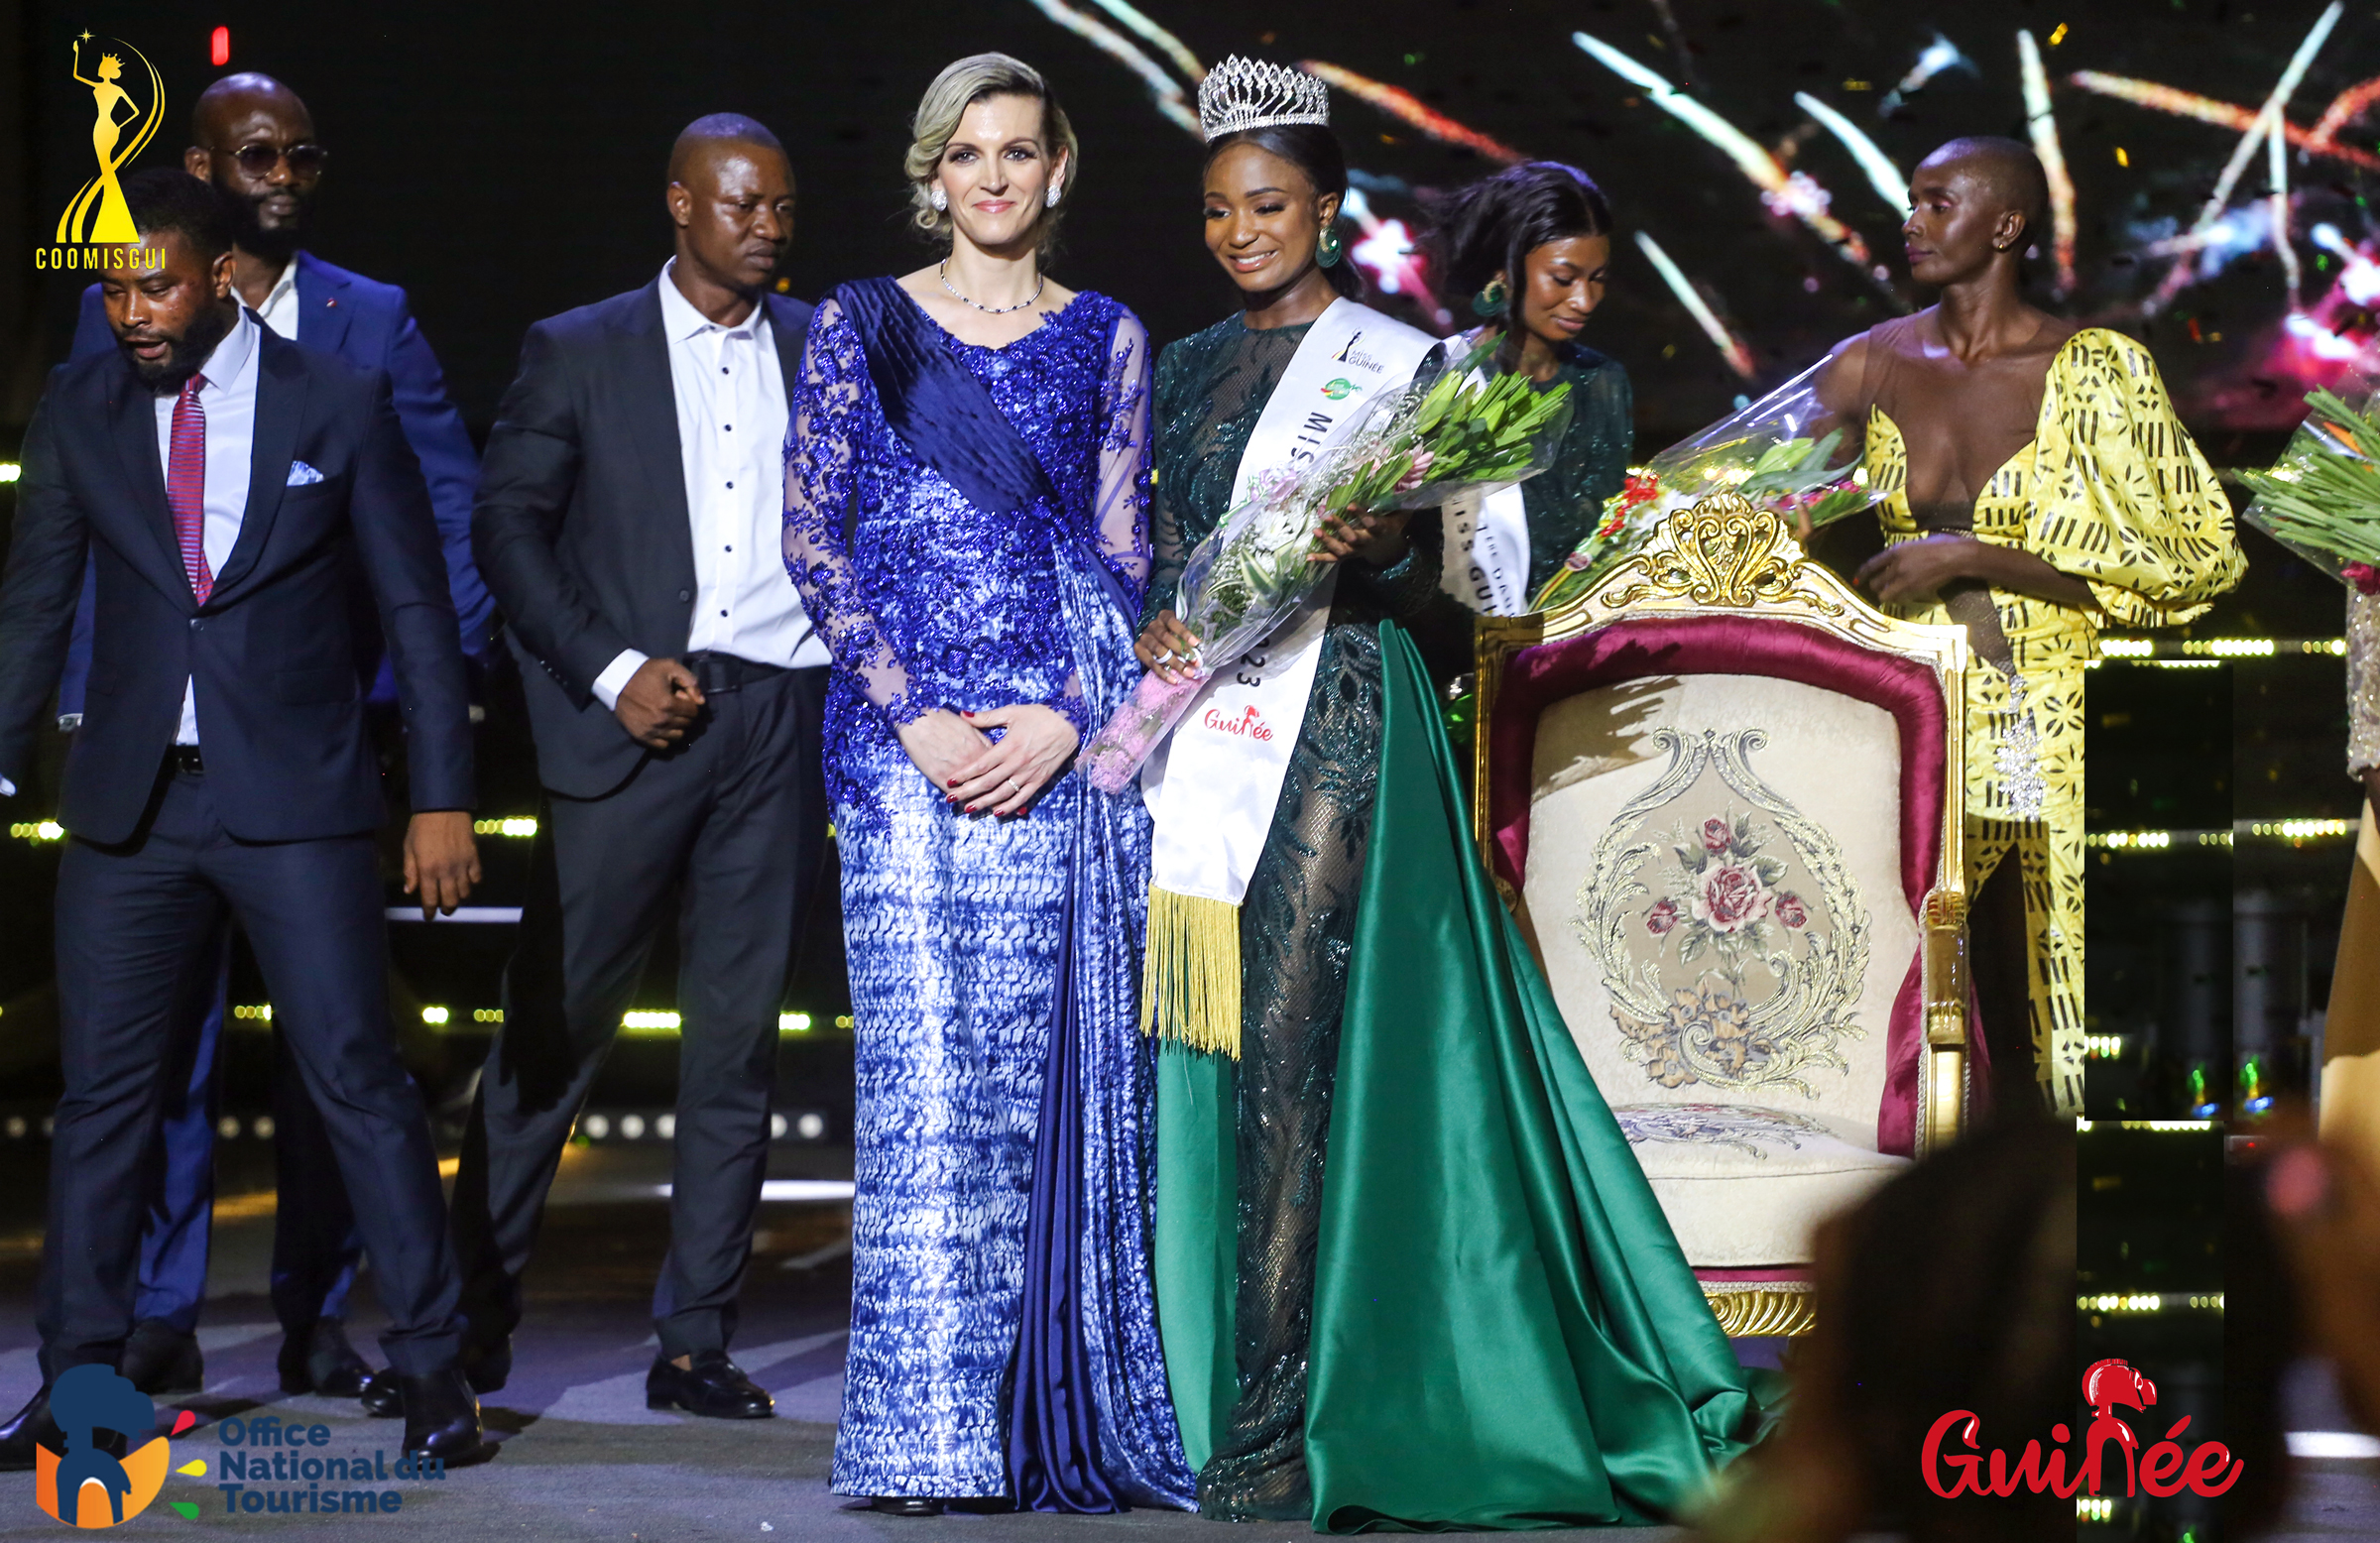 SARAN-KOUROUMA-MISS-GUINEE-2023-EDITION-12 - Saran Kourouma, 1st runner-up Conakry 2023 who becomes Miss Guinea 2023, succeeding Mariame Touré, Miss Guinea 2019 - 1st Runner-up Hadja Kadiatou Condé Miss Conakry 2023 - 2nd Runner-up Aïssatou Dioumo Diallo Miss Alby Beauty 2023 - Under the patronage of the First Lady of Guinee Republic, her excellency Mrs LAURIANE DOUMBOUYA